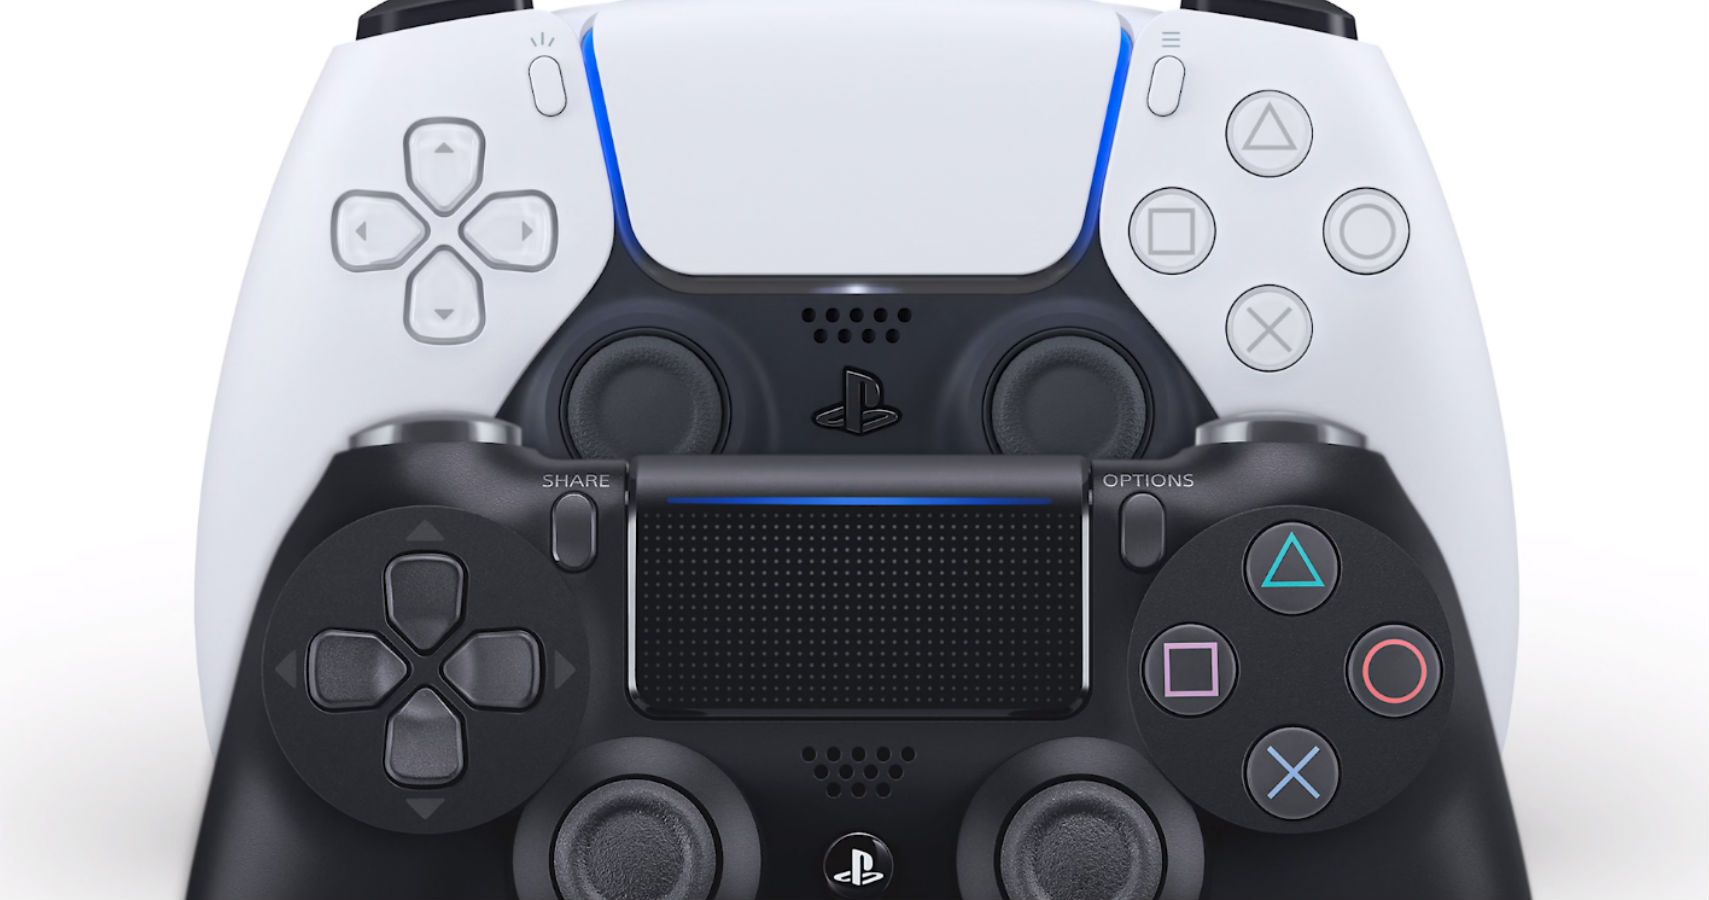 Sony Confirms PS4 Controllers Will Not Be Compatible With PS5 Games But Other Accessories Will Be